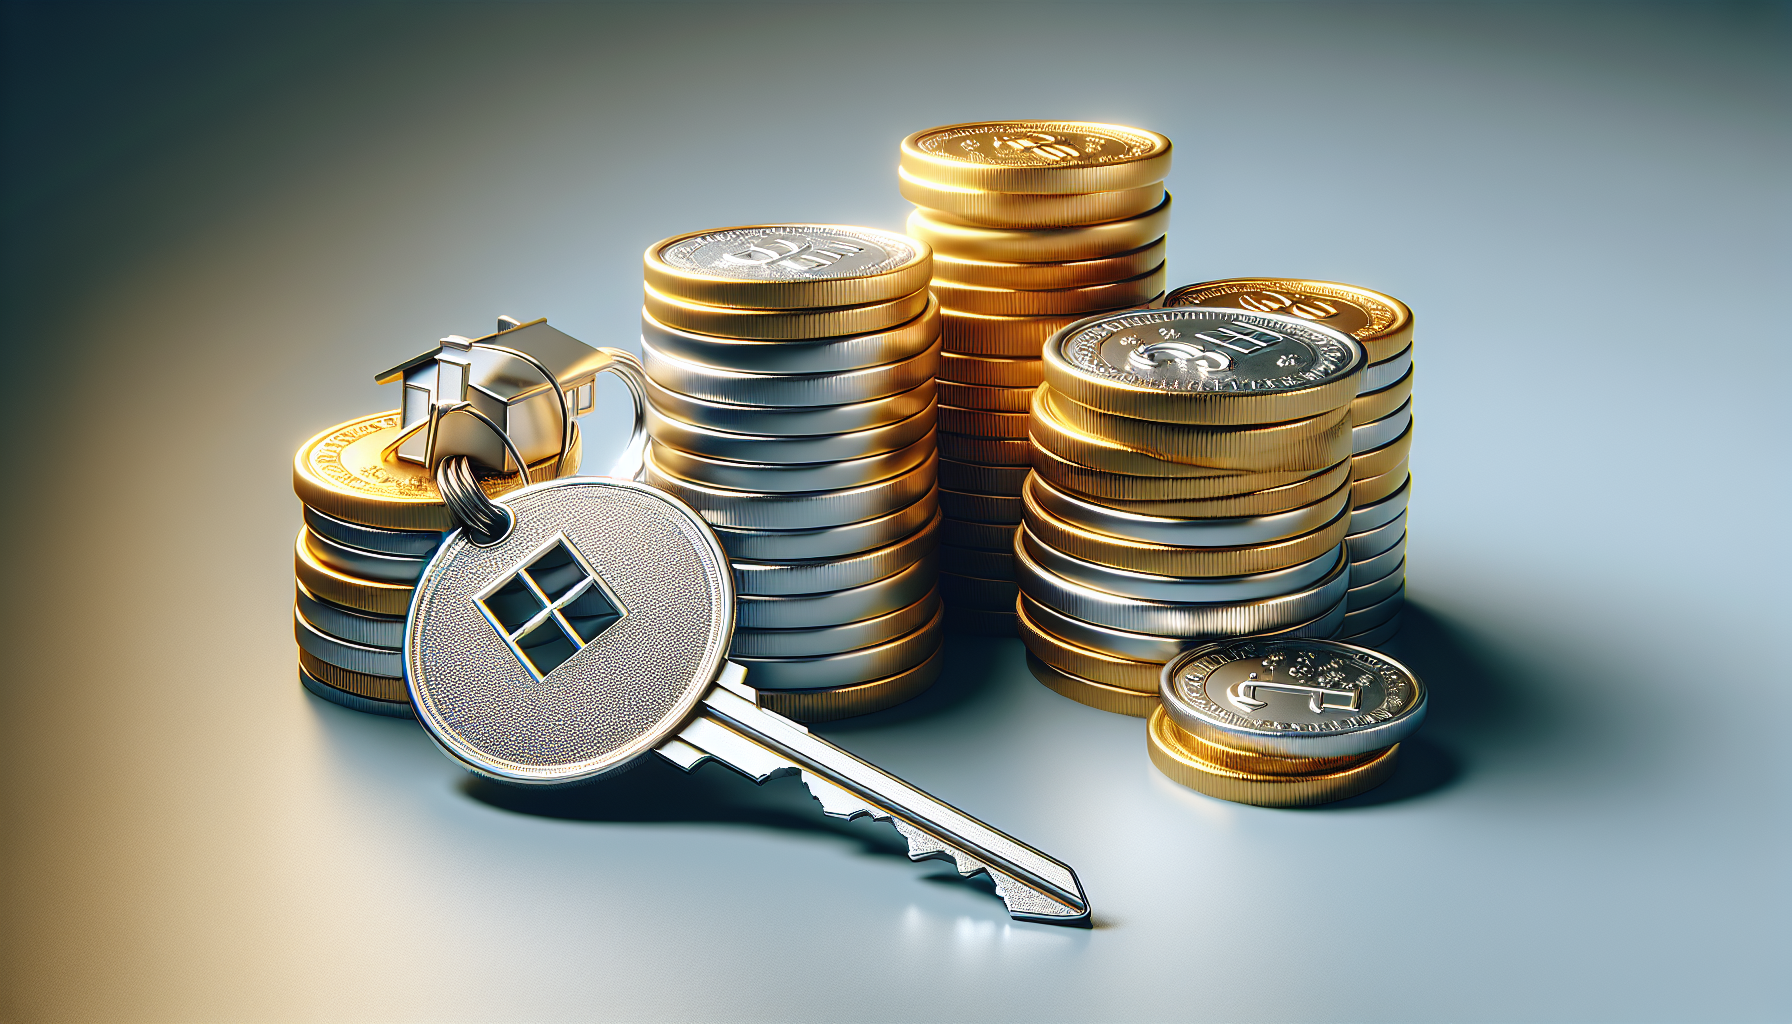 Illustration of a stack of coins and a house key